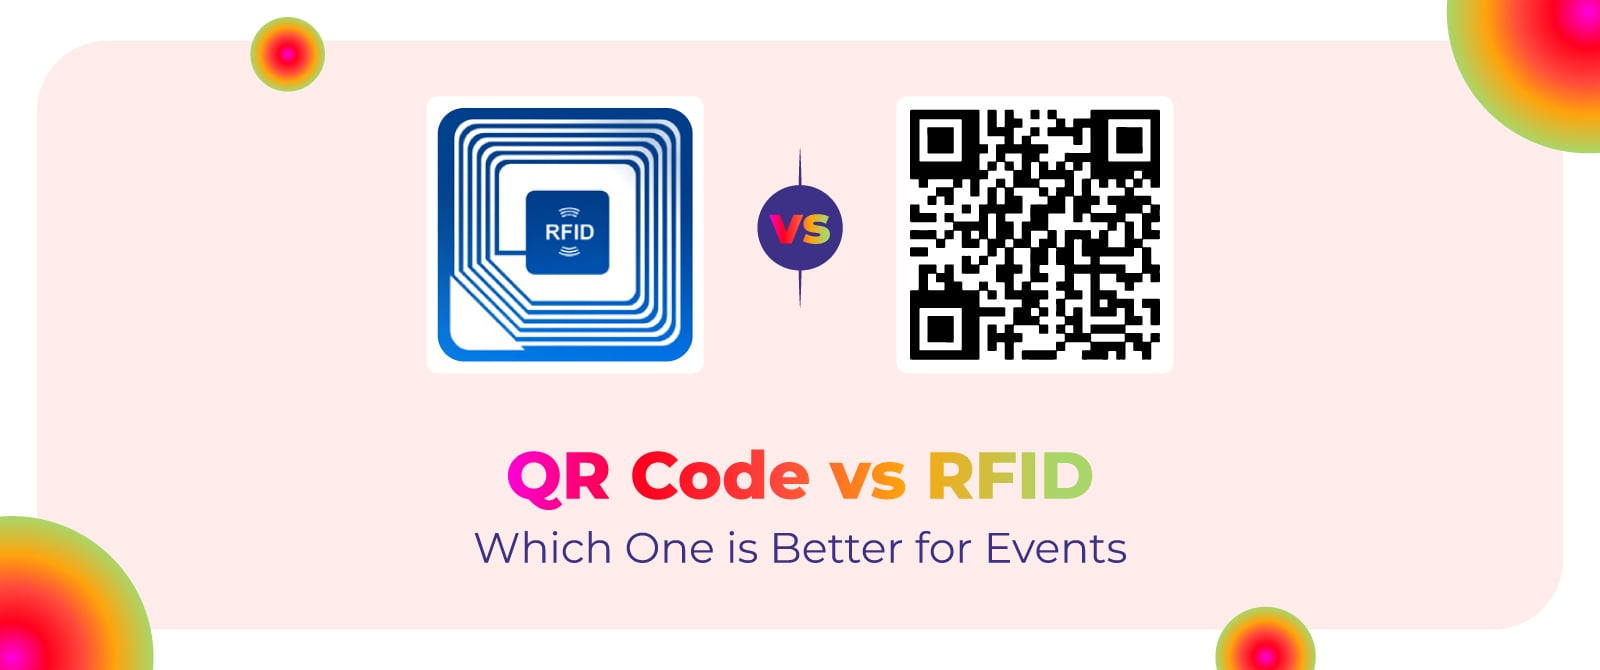 QR Code vs RFID: Which One is Better for Events